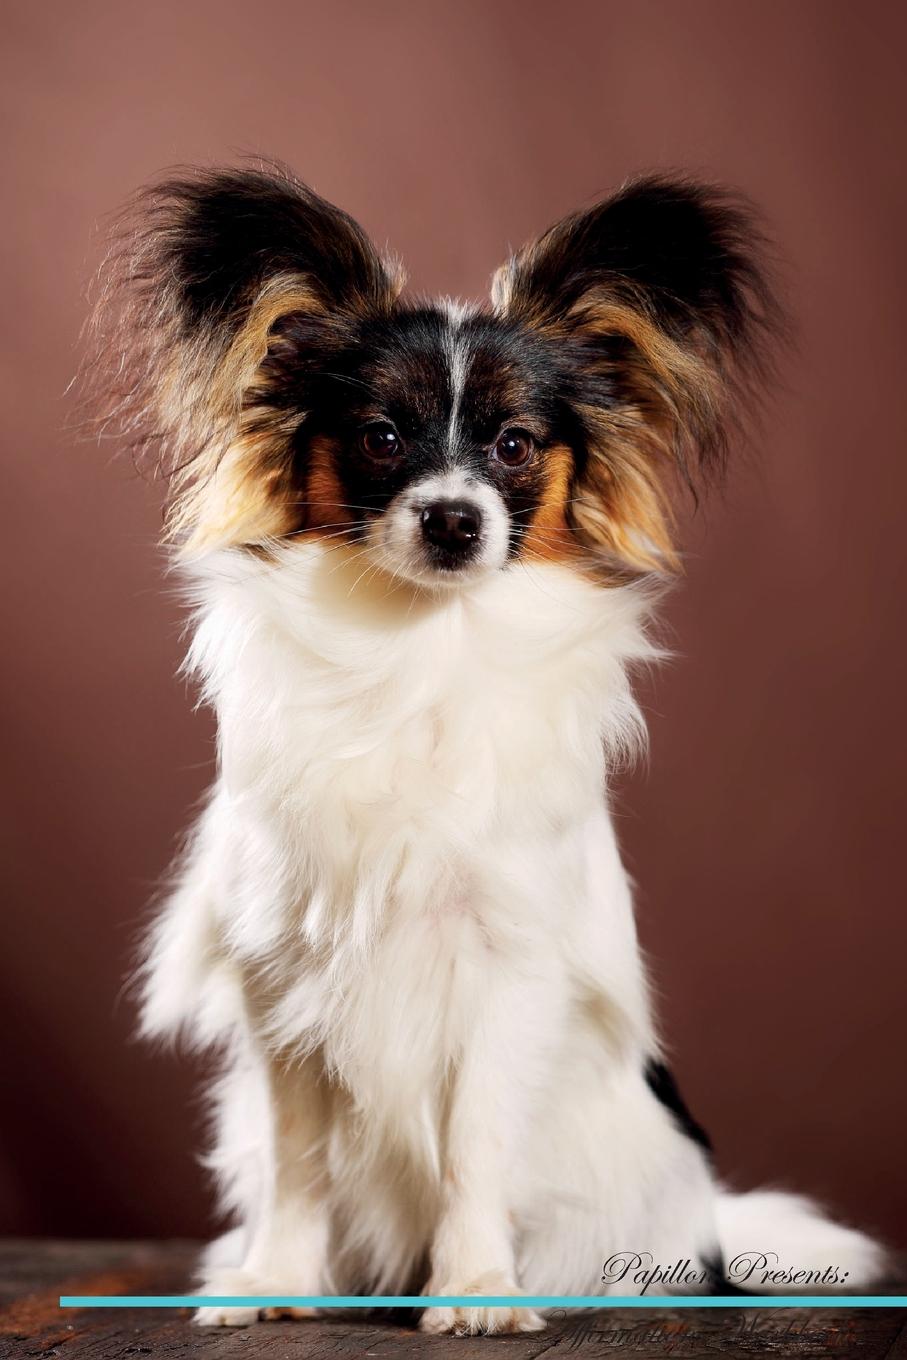 Live Positivity Papillon Affirmations Workbook Papillon Presents. Positive and Loving Affirmations Workbook. Includes: Mentoring Questions, Guidance, Supporting You.